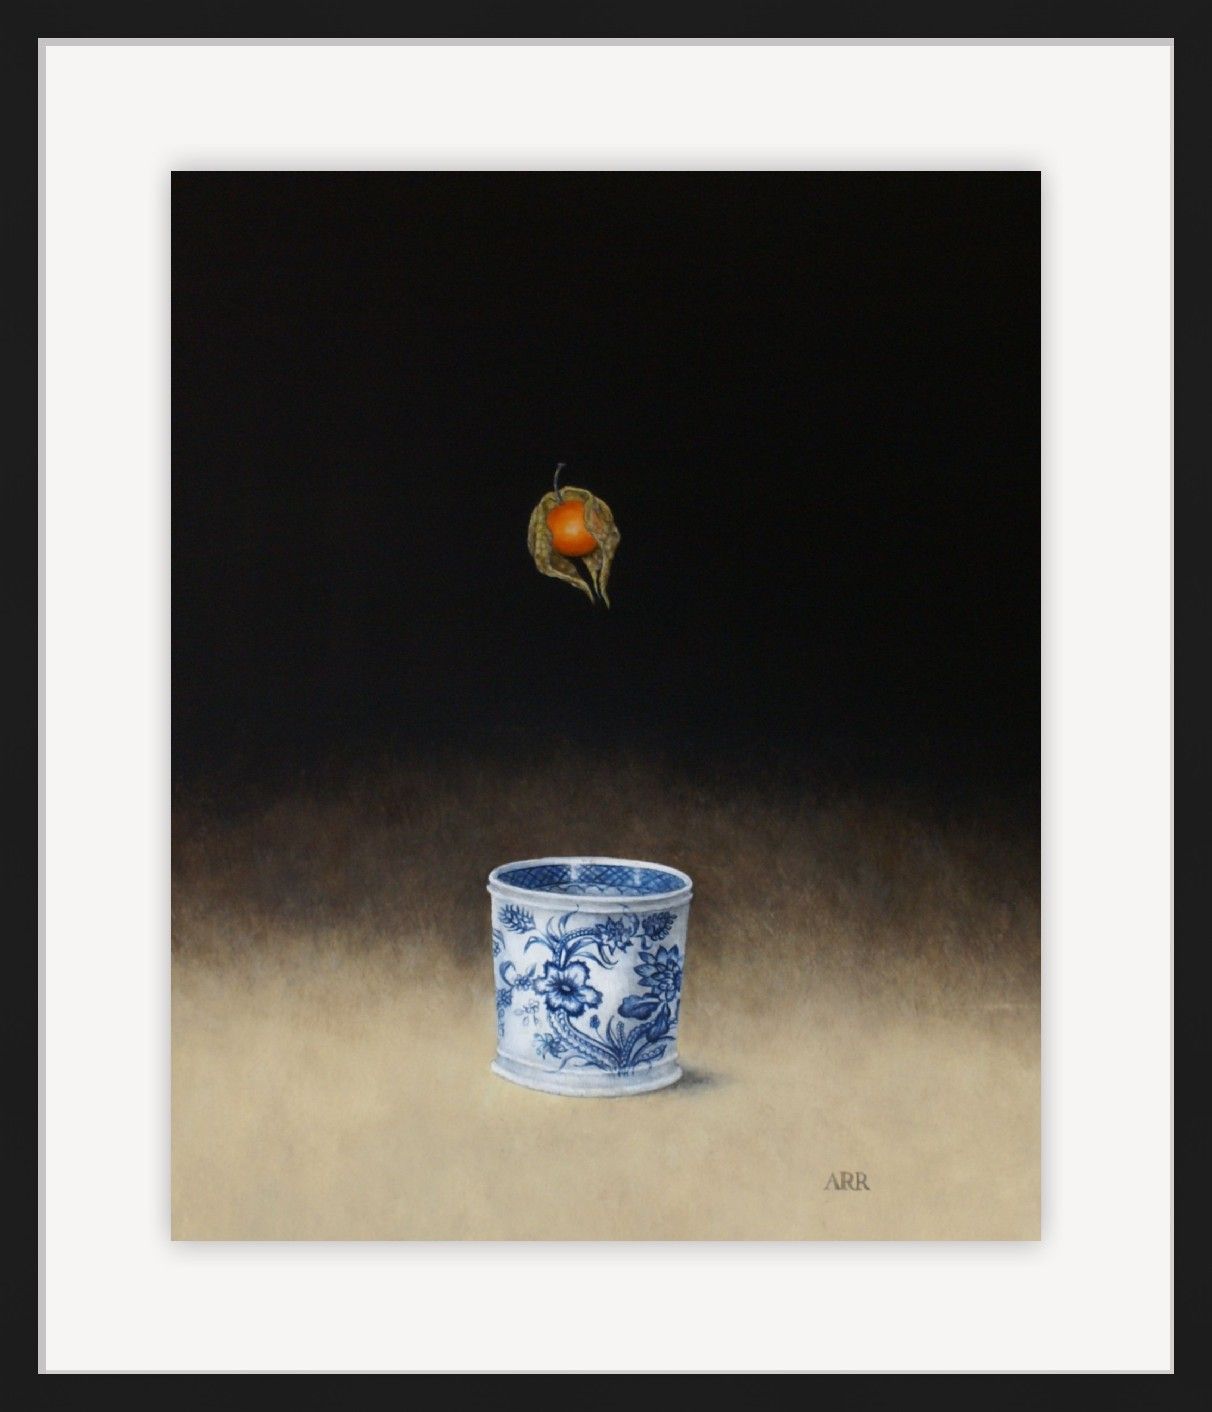 Blue and White Jar with Falling Physalis  by Alison Rankin